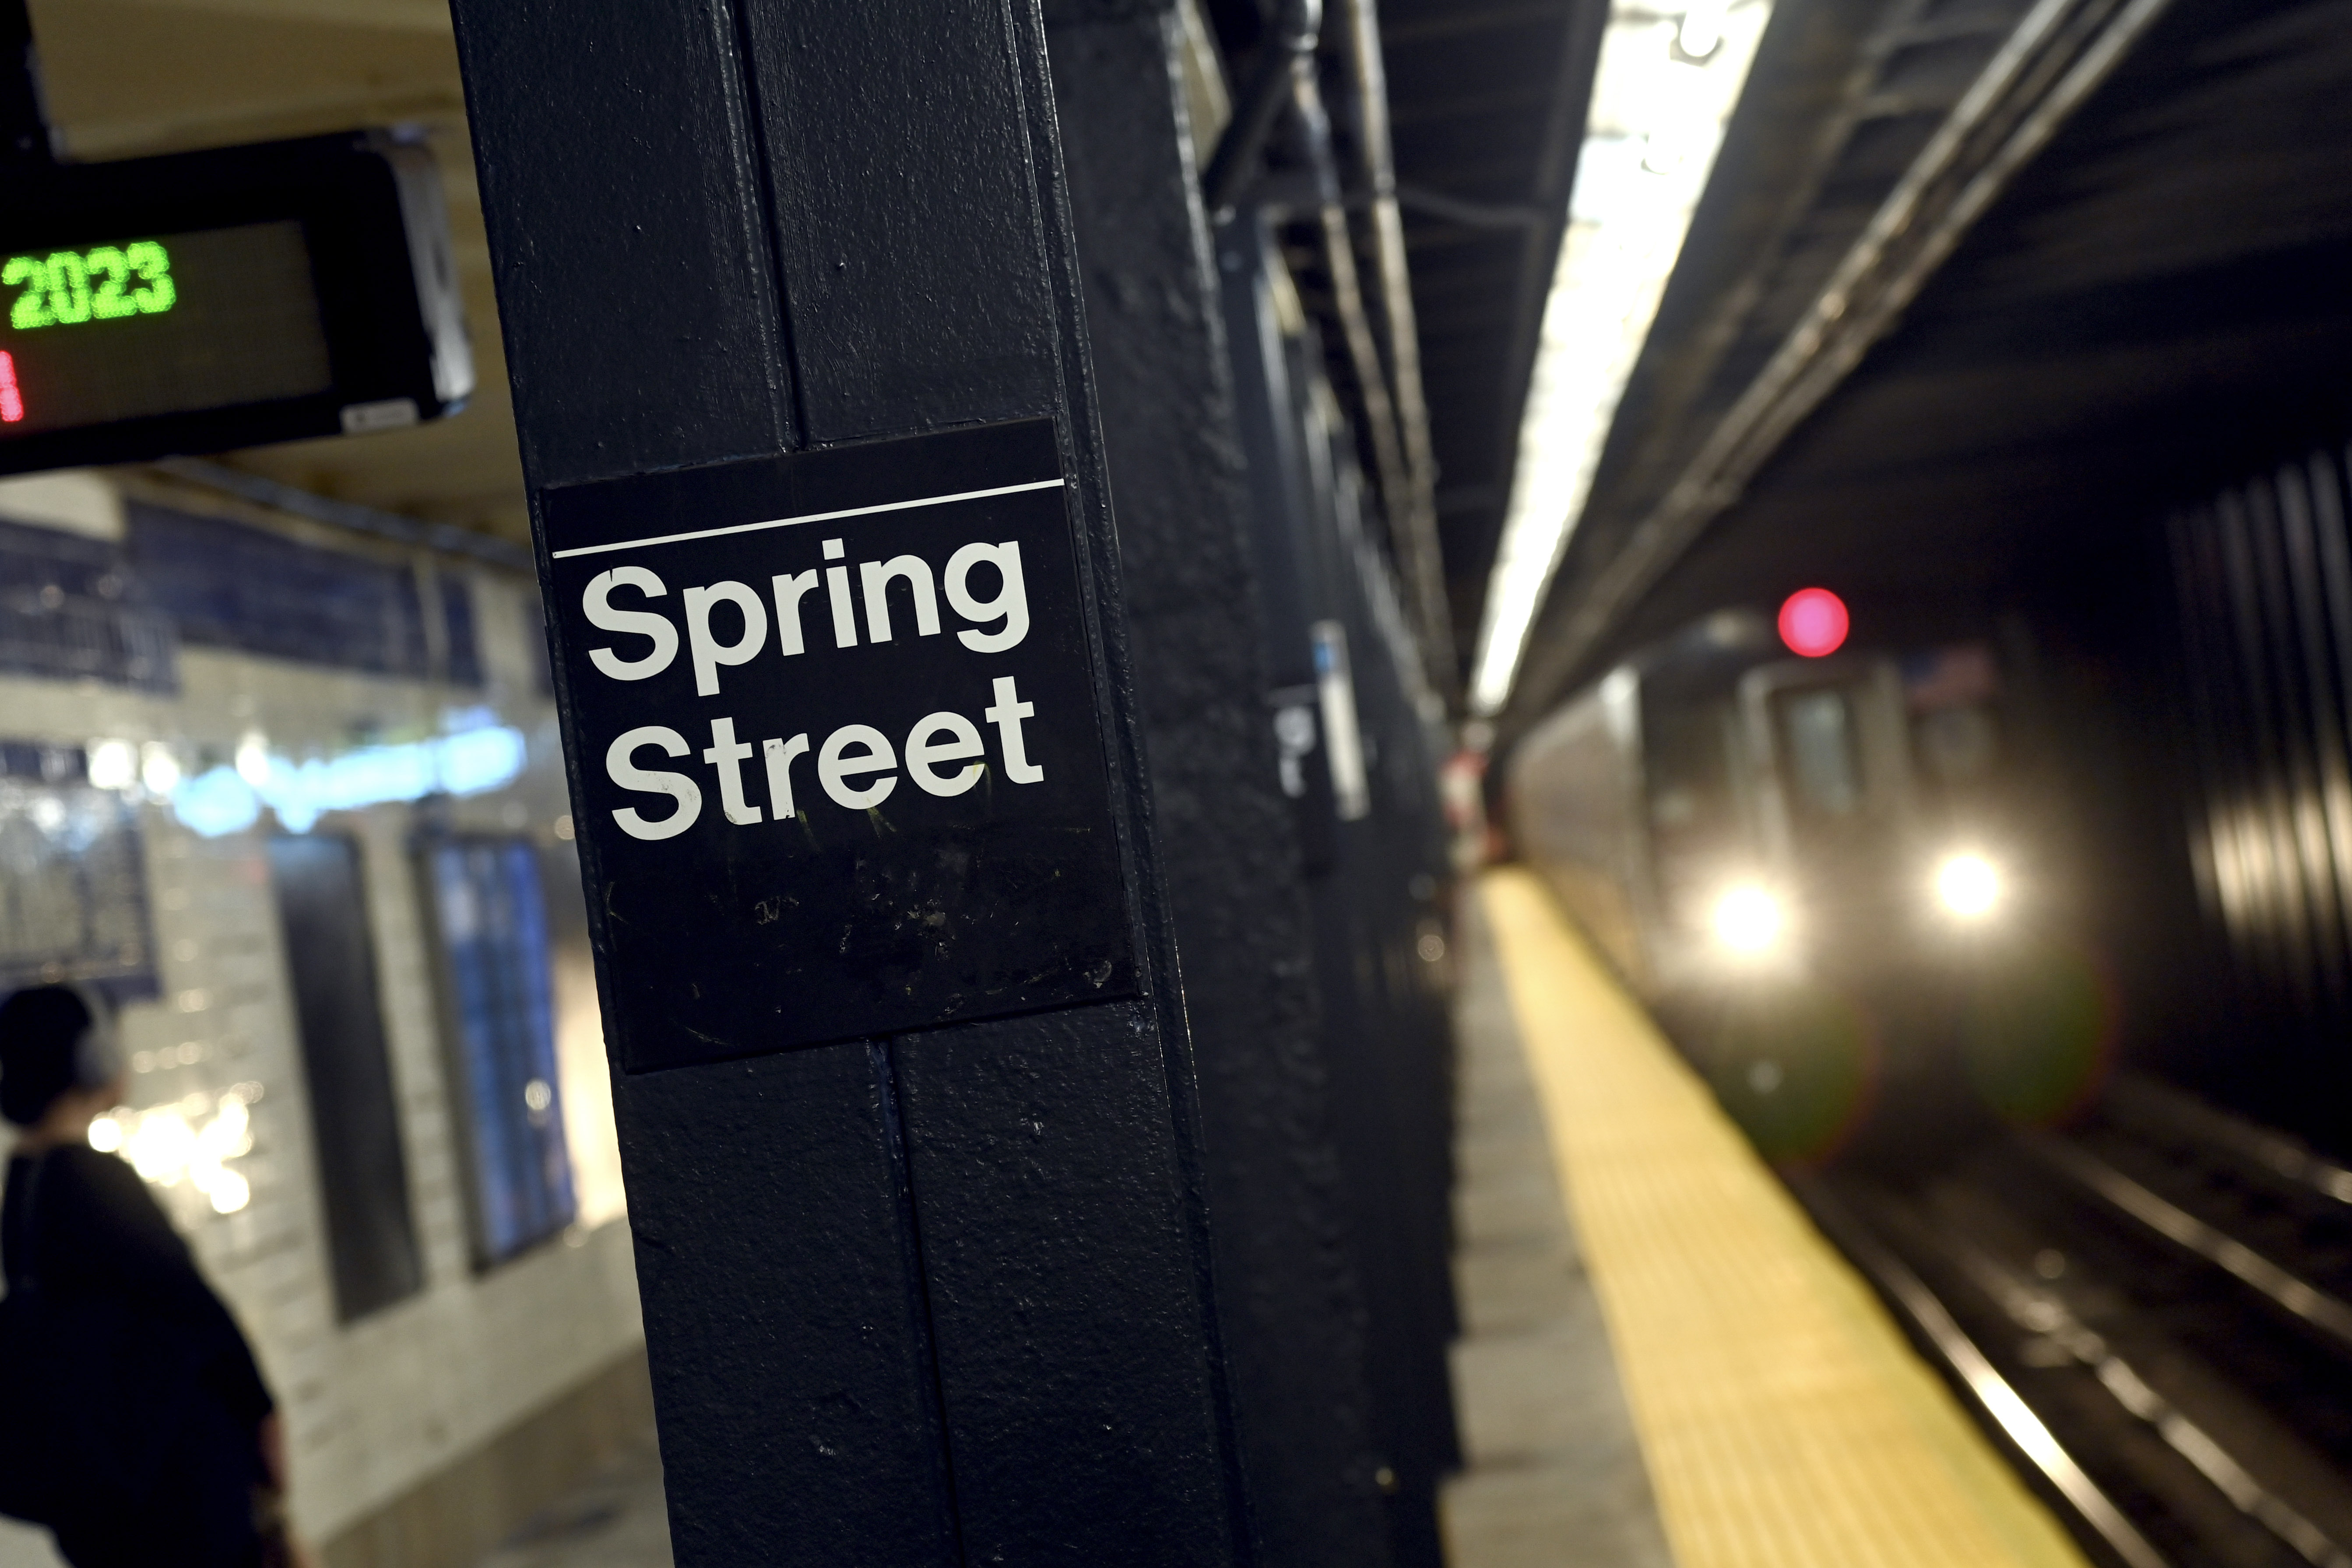 PHOTOS: MTA Completes Re-NEW-Vation at Spring St C E Station